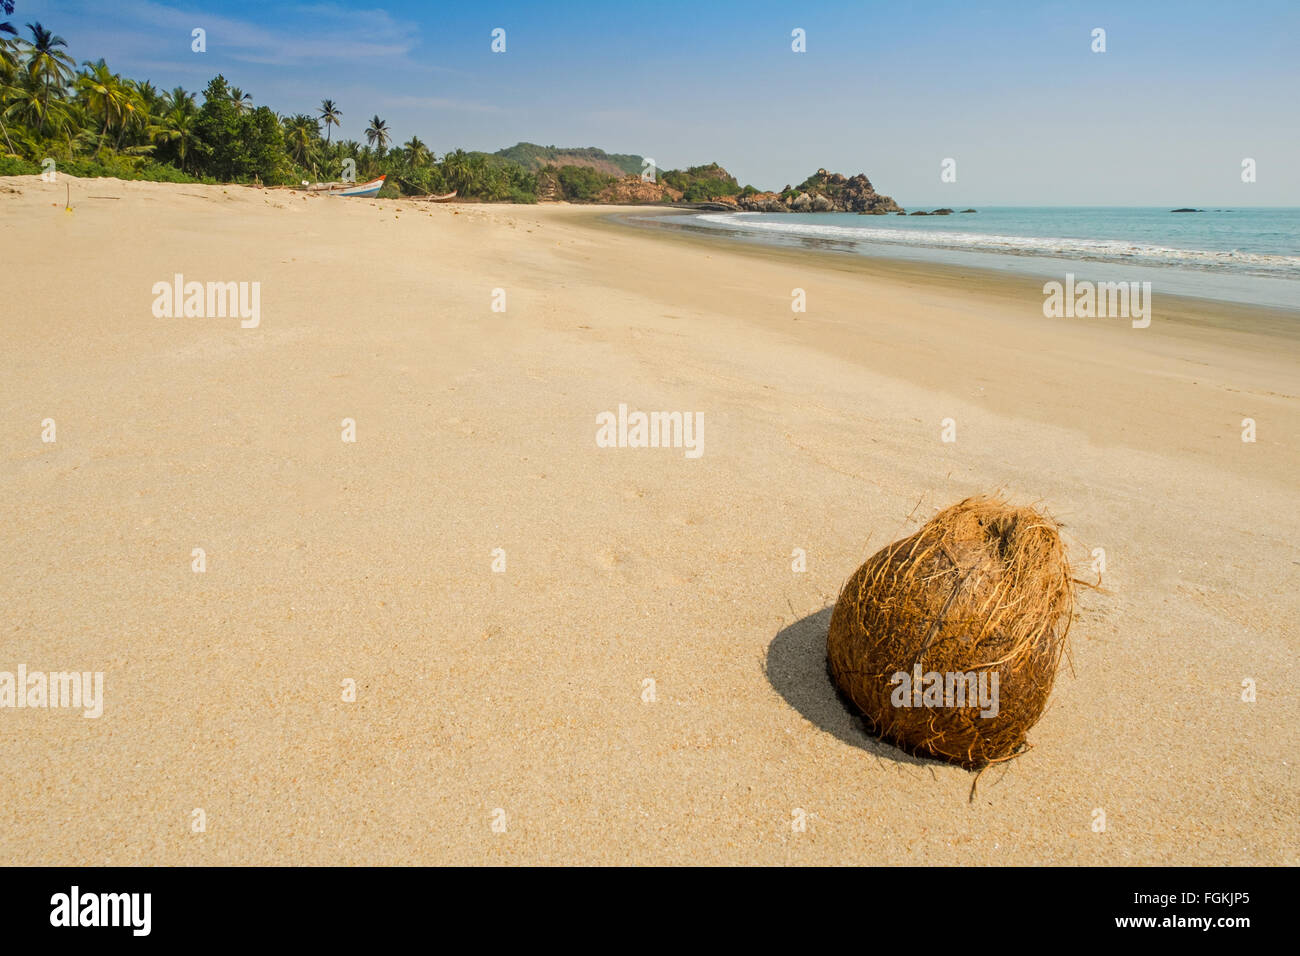 Coconut on the sand of a deserted beach on the Konkan coast in Maharashtra state, southern India Stock Photo